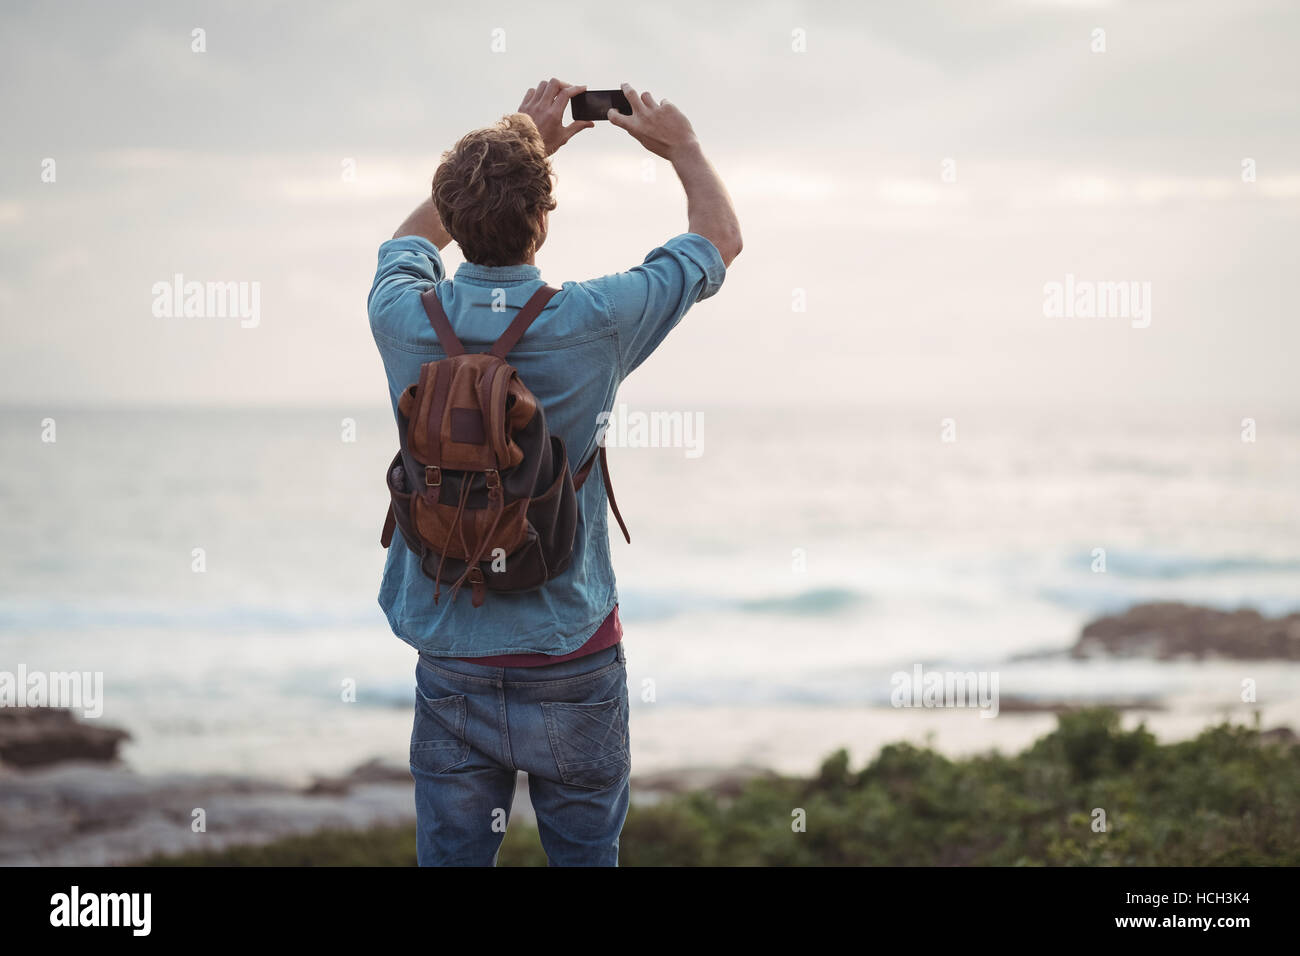 Man photographing using mobile phone Stock Photo